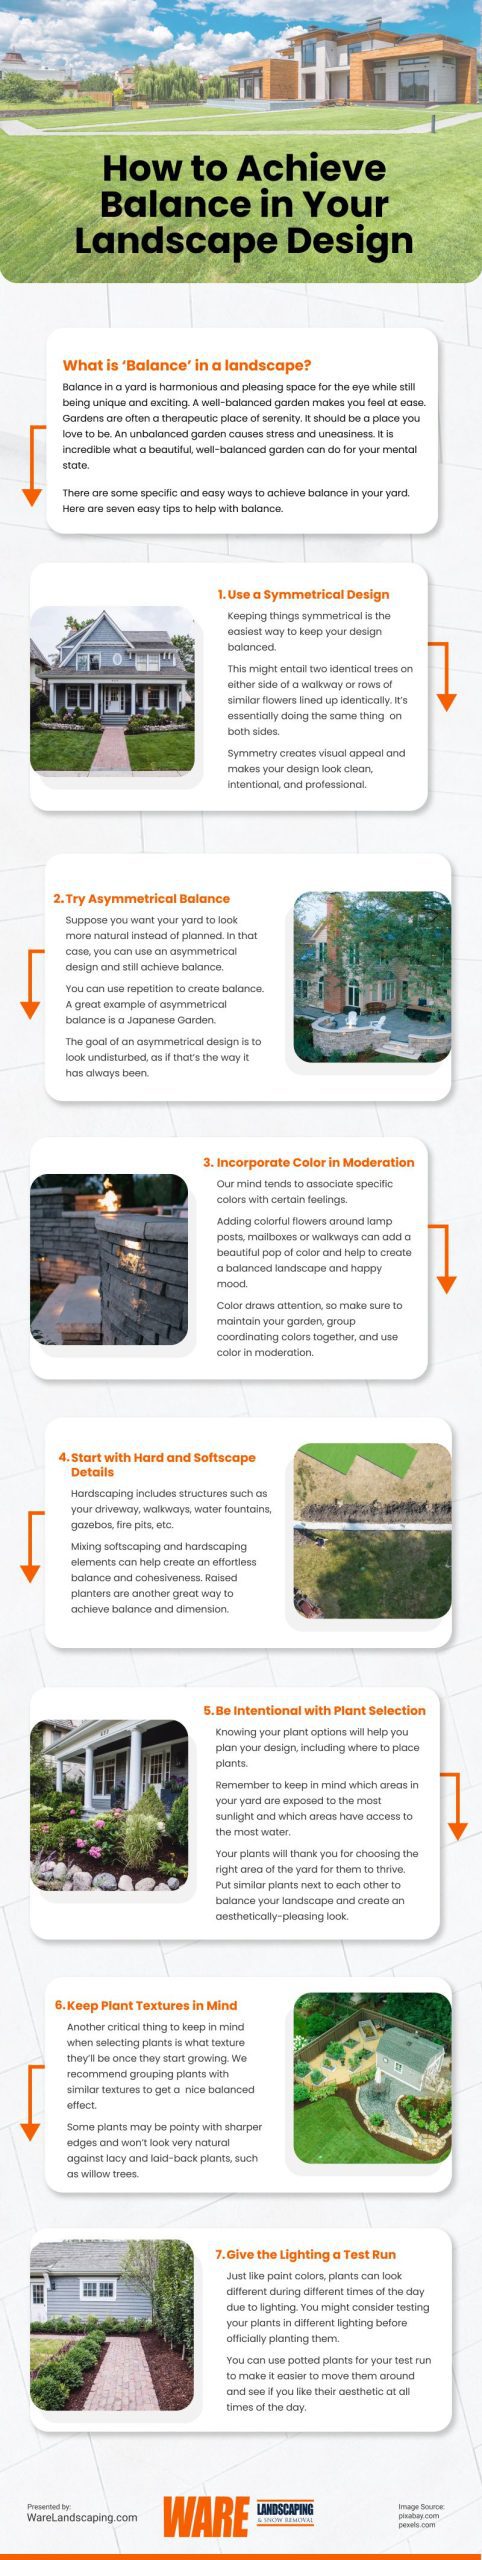 How to Achieve Balance in Your Landscape Design Infographic